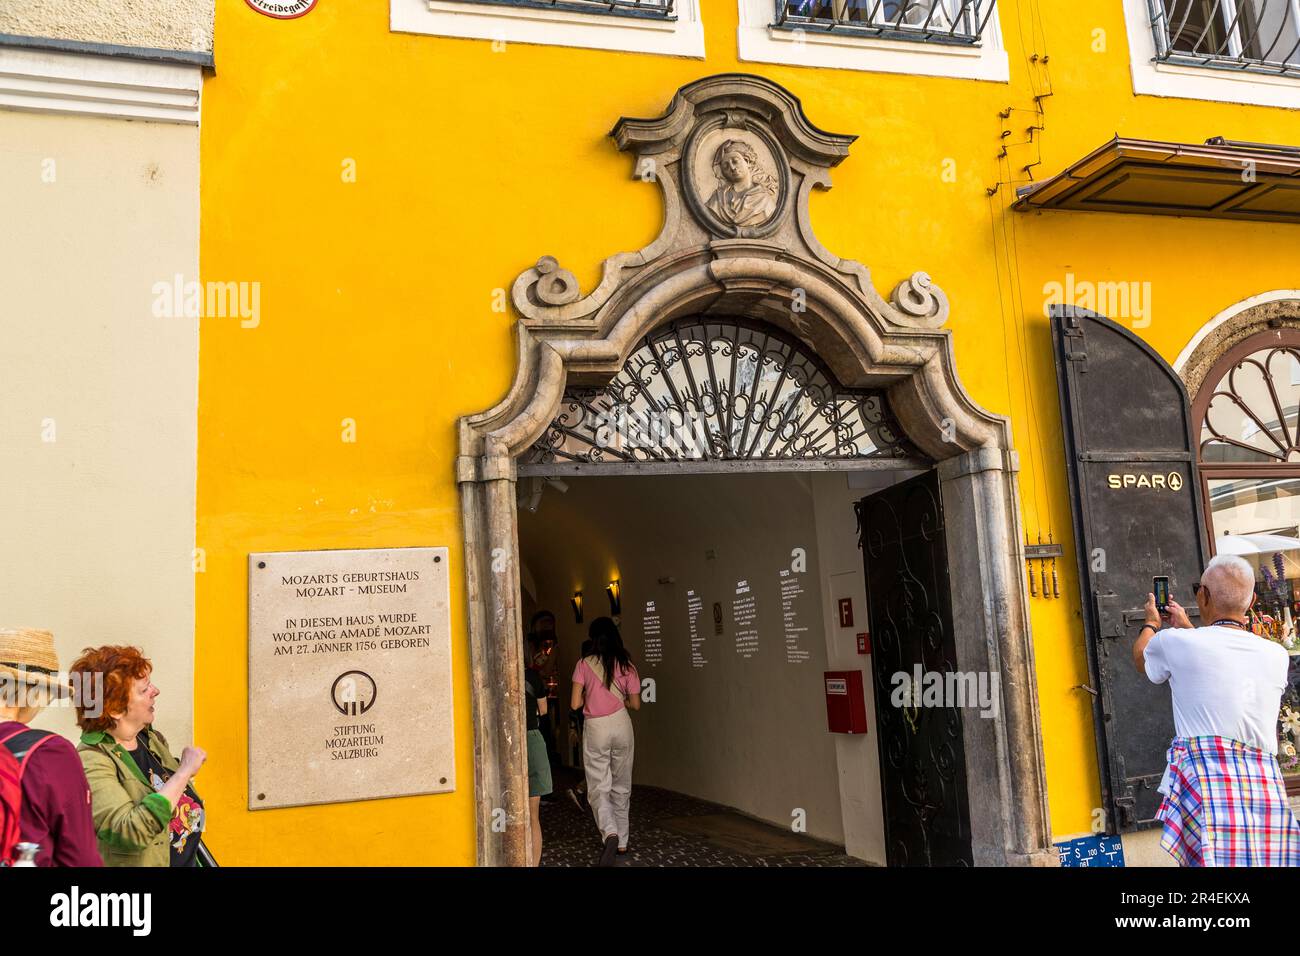 Mozart's birthplace at Getreidegasse 9 in Salzburg, Austria. Until 1994, the first floor housed a delicatessen and direct successor to the "Alte Hagenauerische Specereywarenhandlung". Today, the SPAR supermarket chain supplies tourists from all over the world with drinks and snacks here Stock Photo